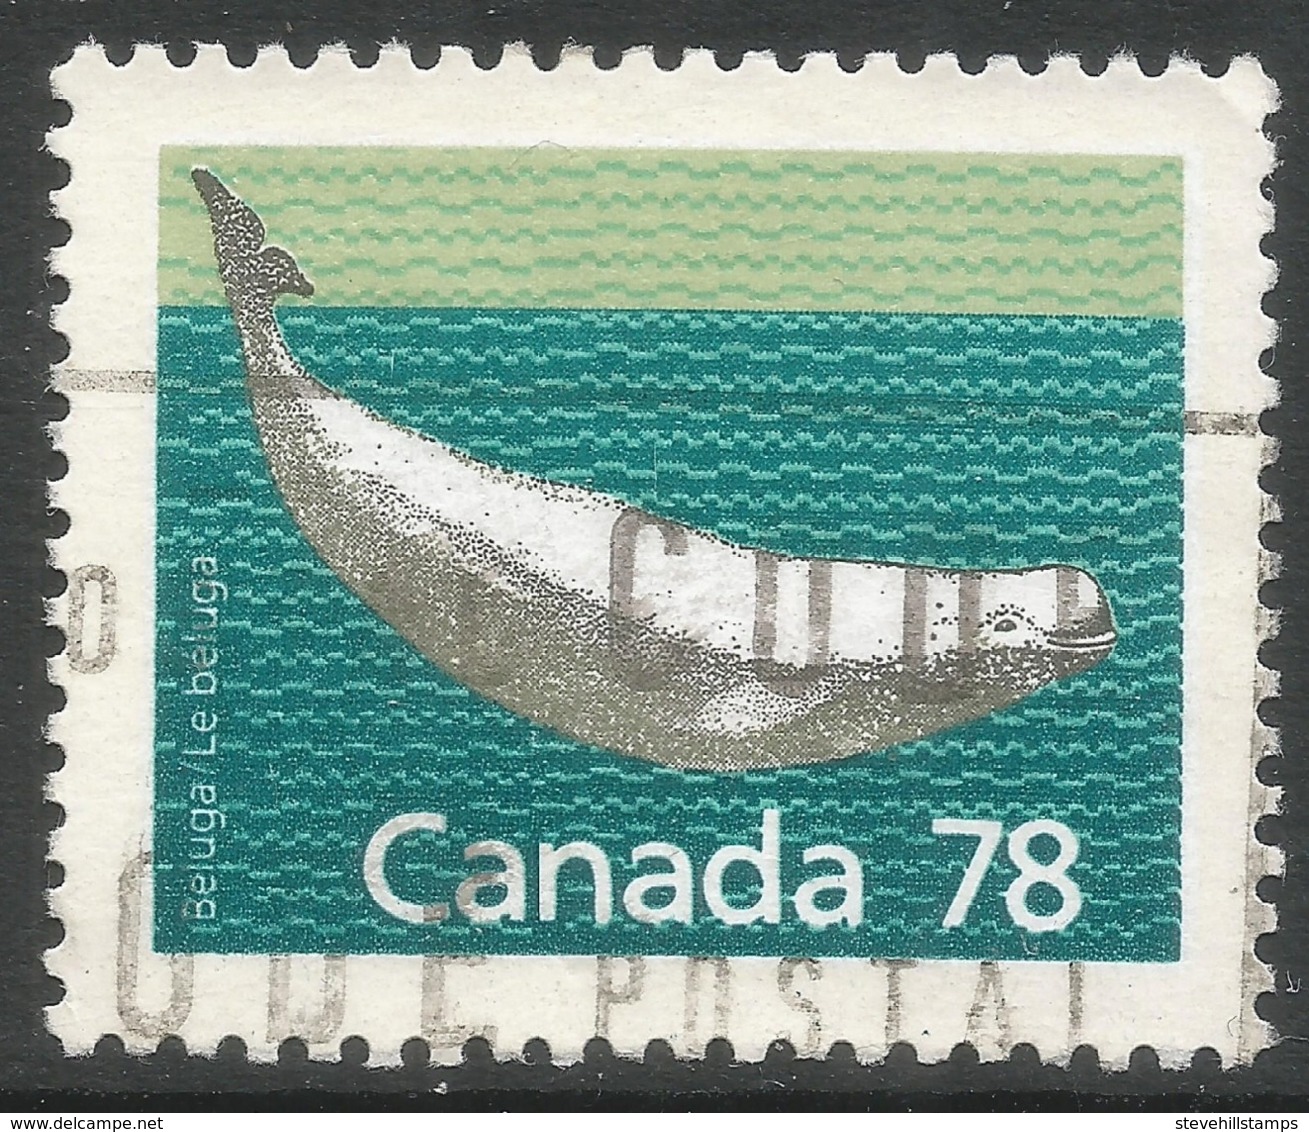 Canada. 1988 Canadian Mammals And Architecture. 78c Used. SG 1276 - Used Stamps